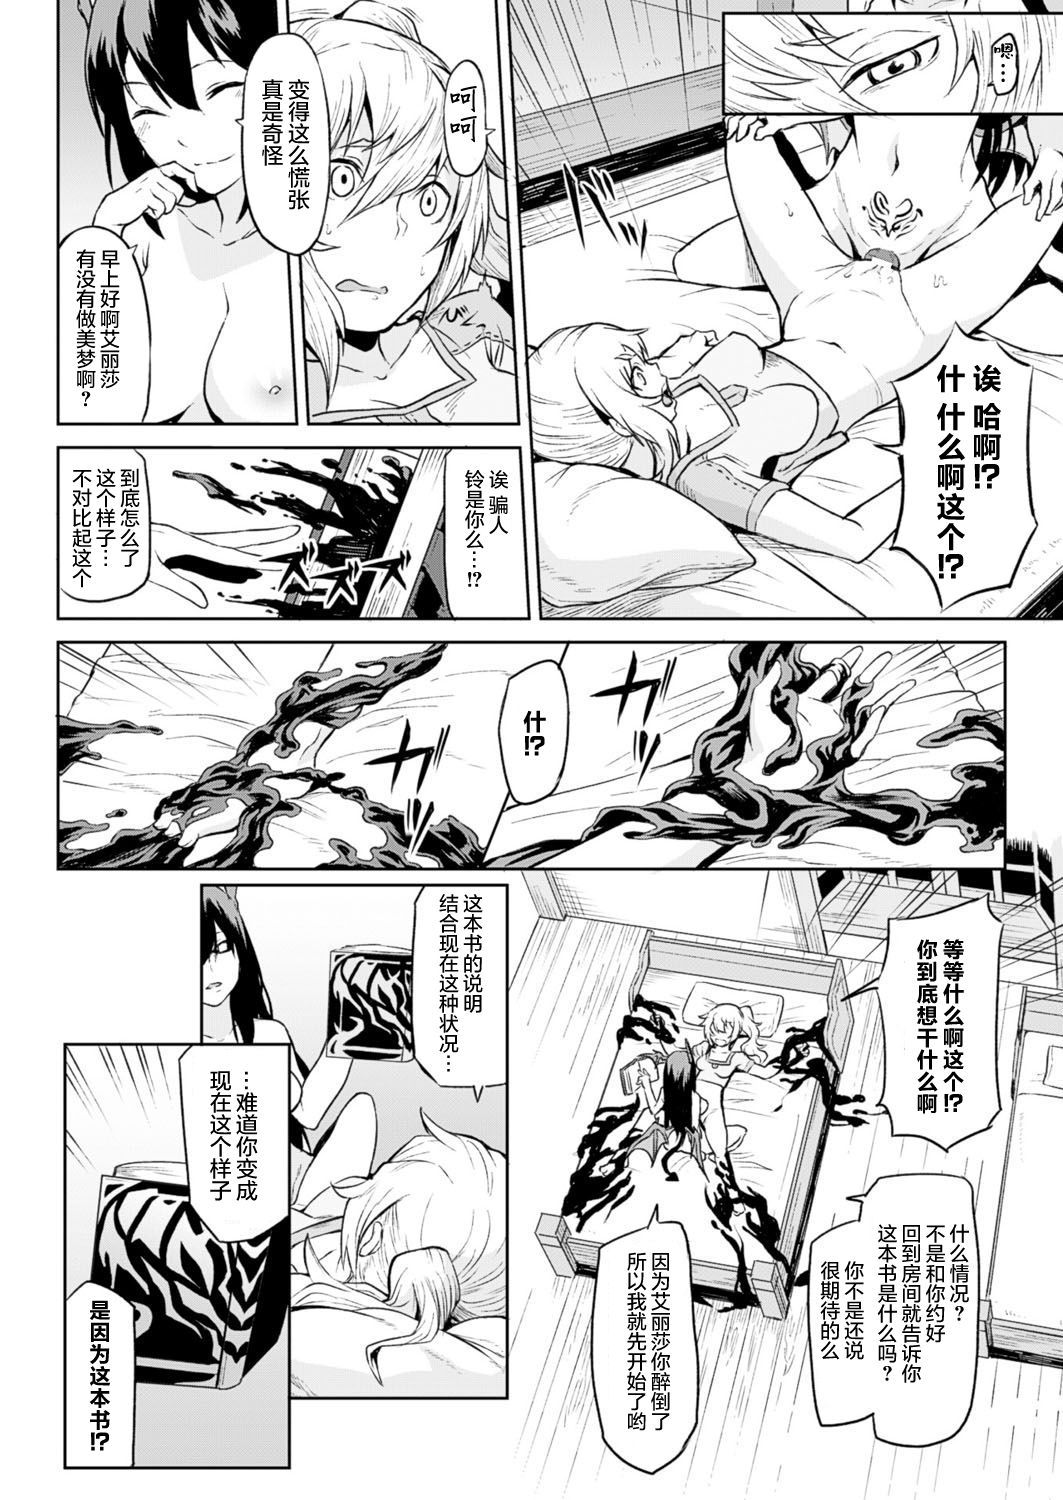 [Take] The Book of the Licentious Thief (COMIC Unreal 2016-10 Vol. 63) [Chinese] [这很恶堕 x Lolipoi汉化组] [タケ] 淫泥の書 (コミックアンリアル 2016年10月号 Vol.63) [中国翻訳]